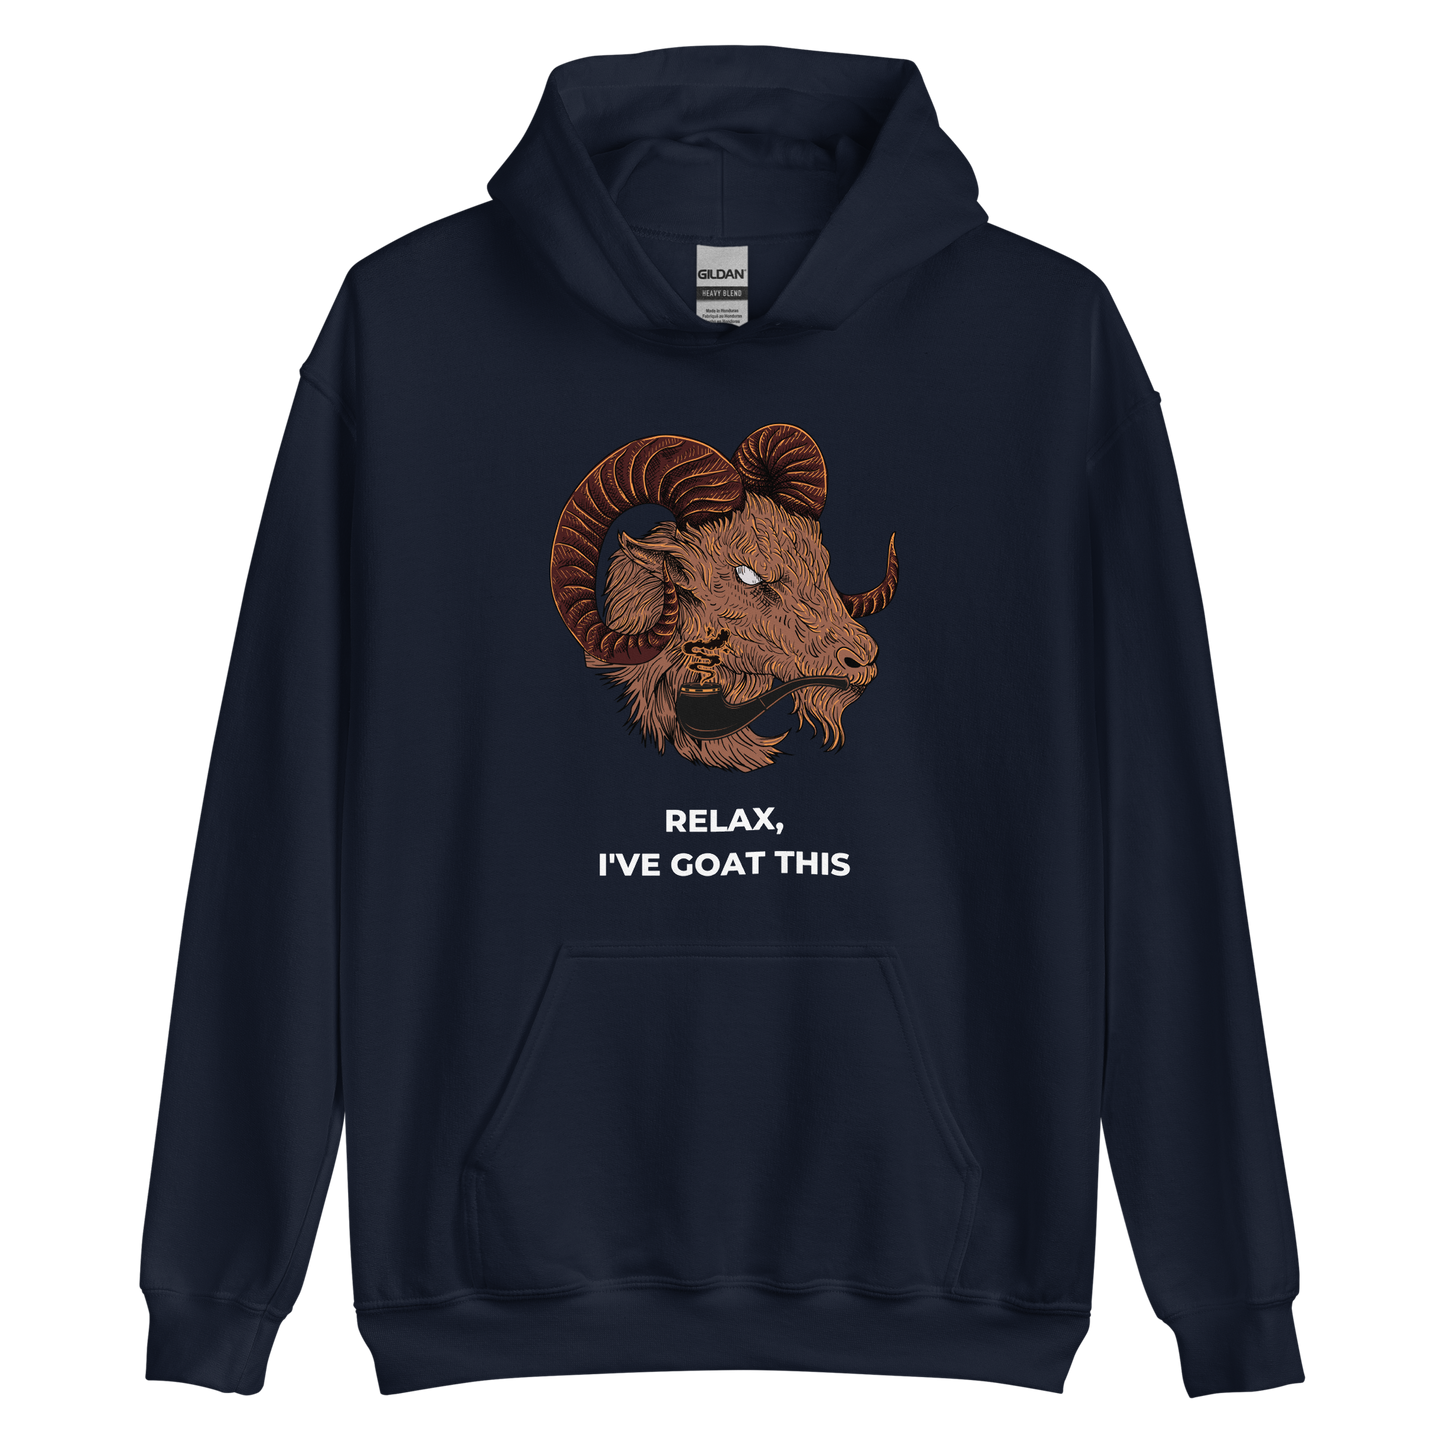 Navy Goat Hoodie featuring a captivating Relax, I've Goat This graphic on the chest - Funny Graphic Goat Hoodies - Boozy Fox